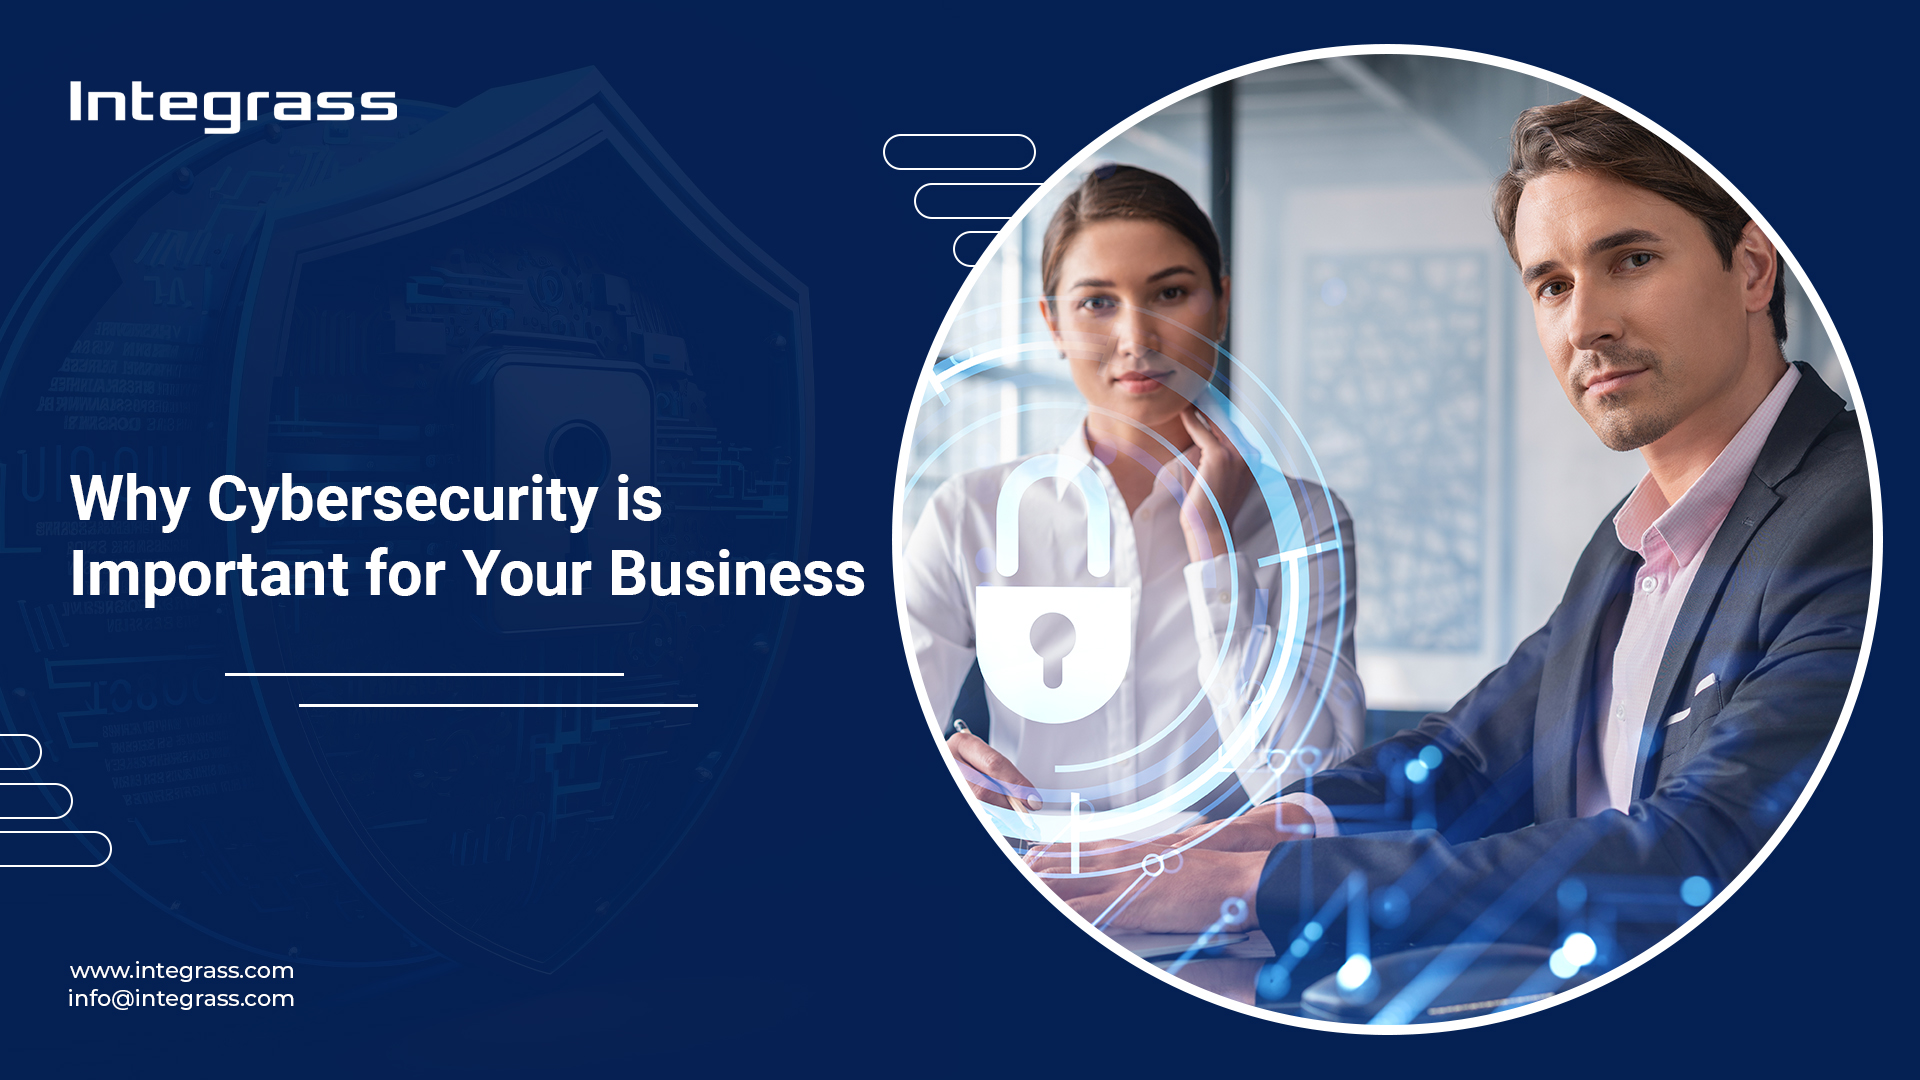 A group of men and women on the right side of the image are looking straight at the viewer. On the left side of the image is a blog title that reads "Why Cybersecurity is Important for Your Business.